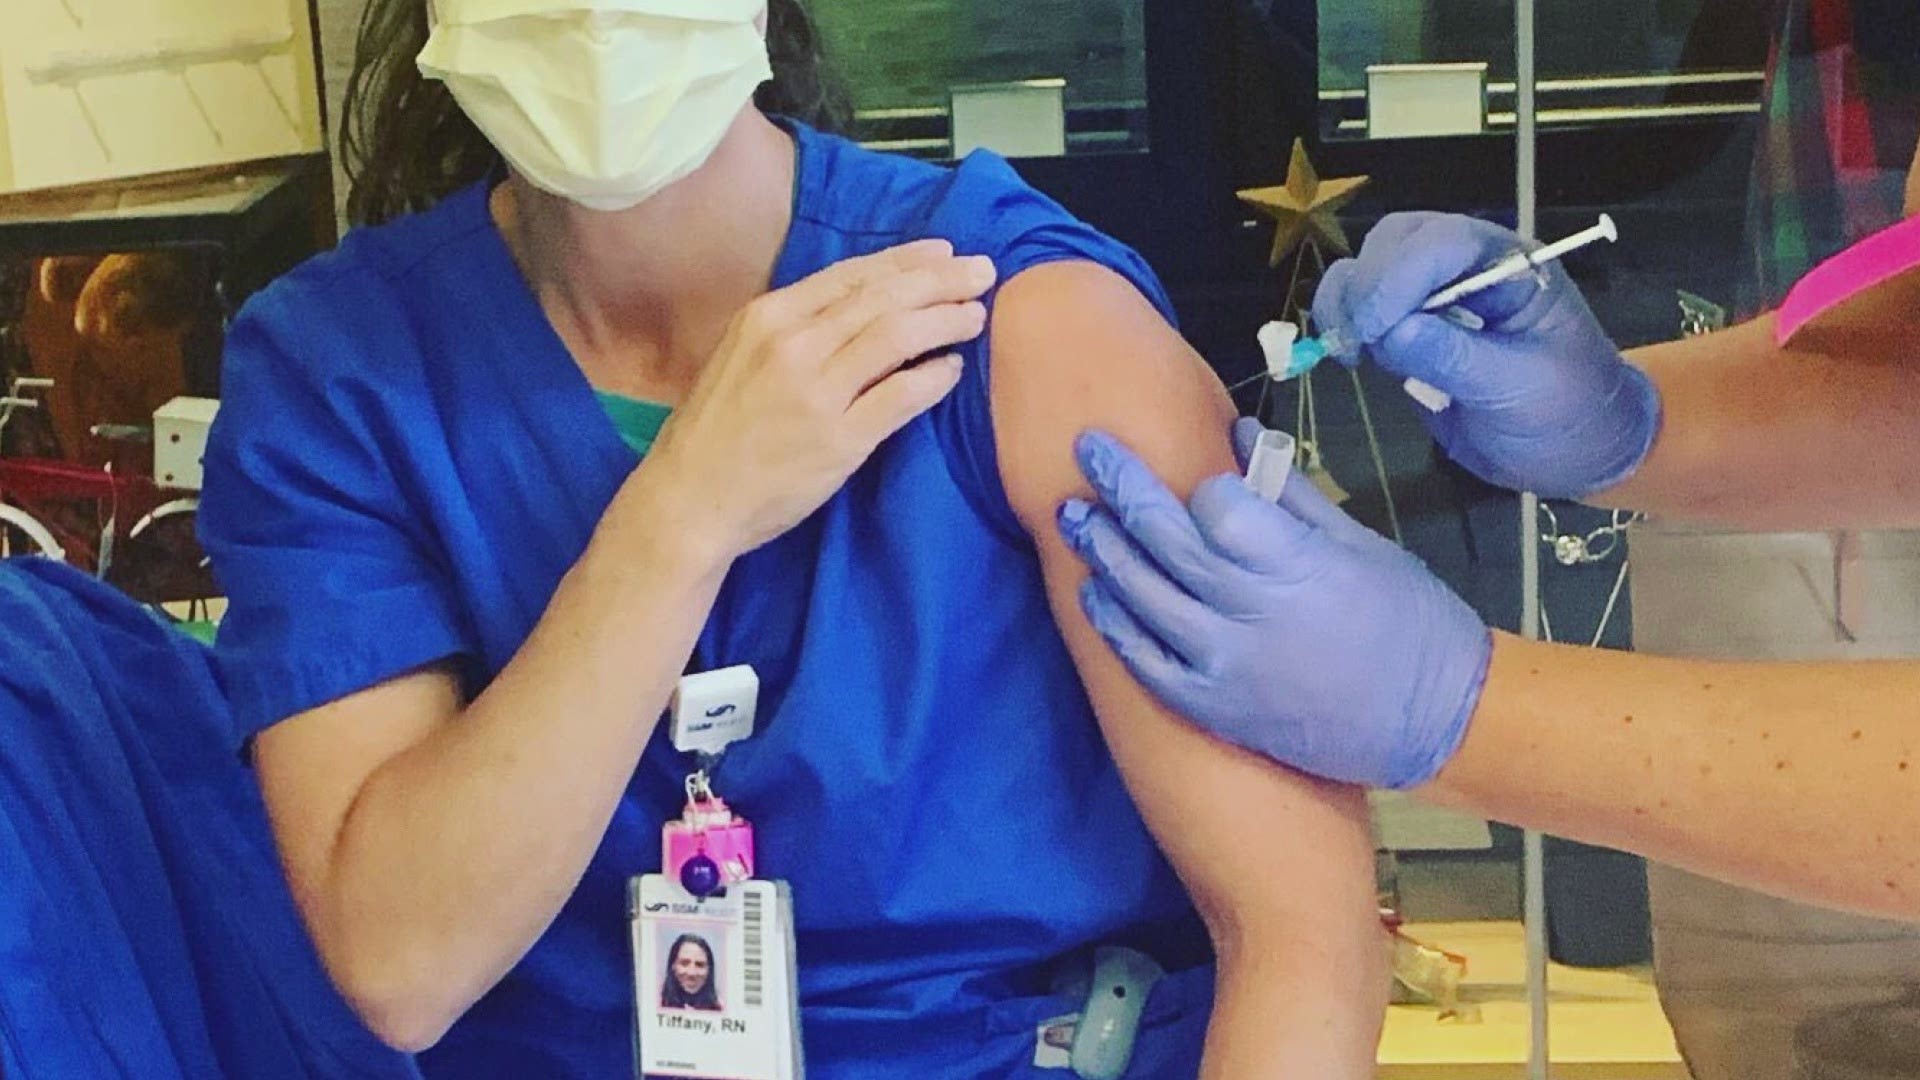 A St. Mary's nurse describes the 24 hours following her second doses of the COVID-19 vaccine